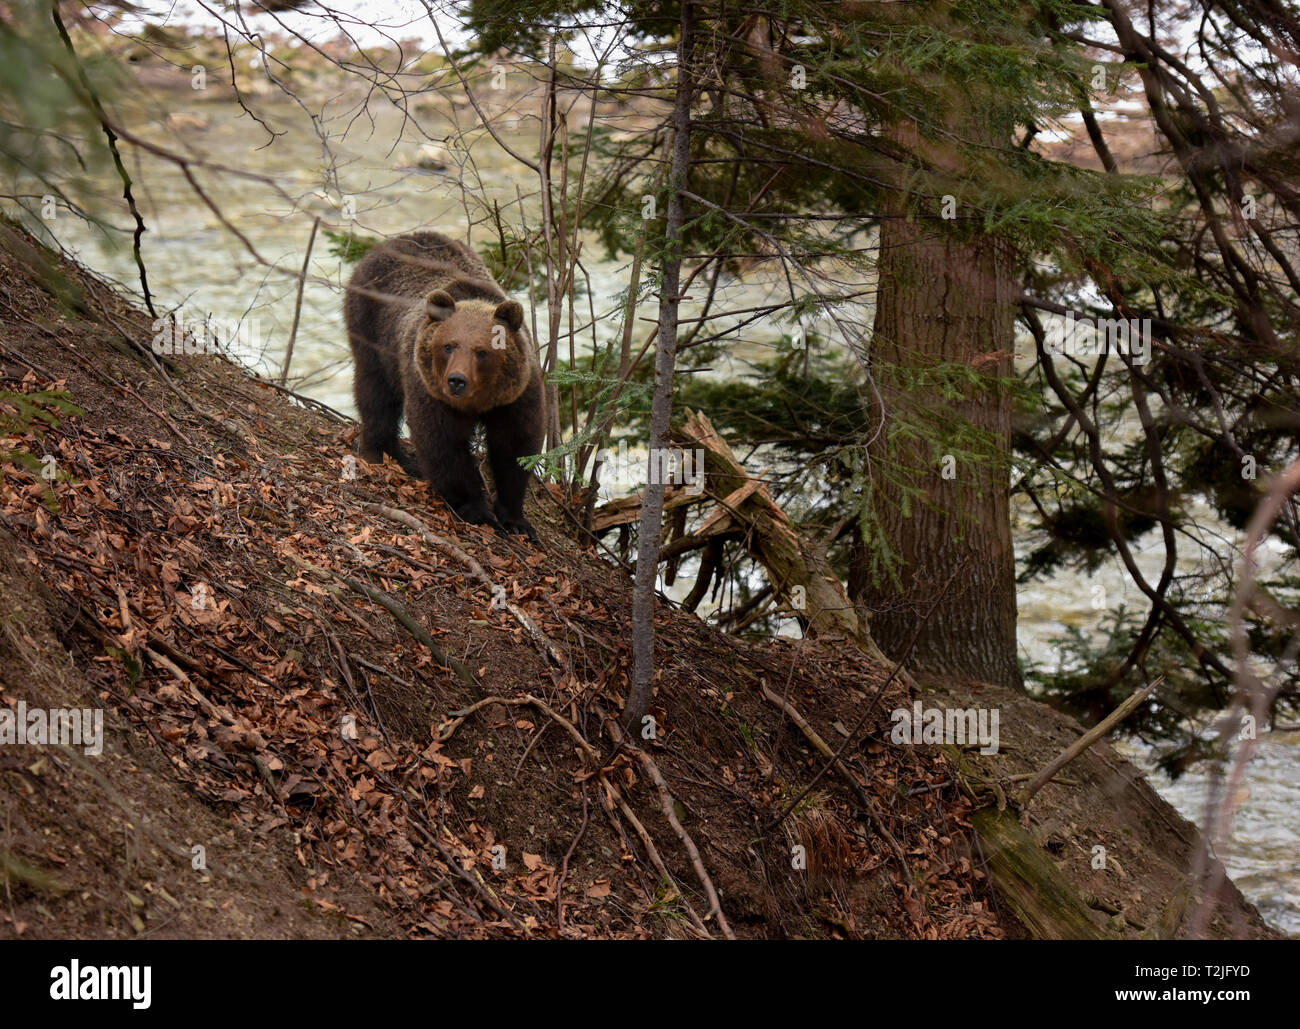 Brown bear on a river bank. Dangerous meeting with wild animal. Stock Photo